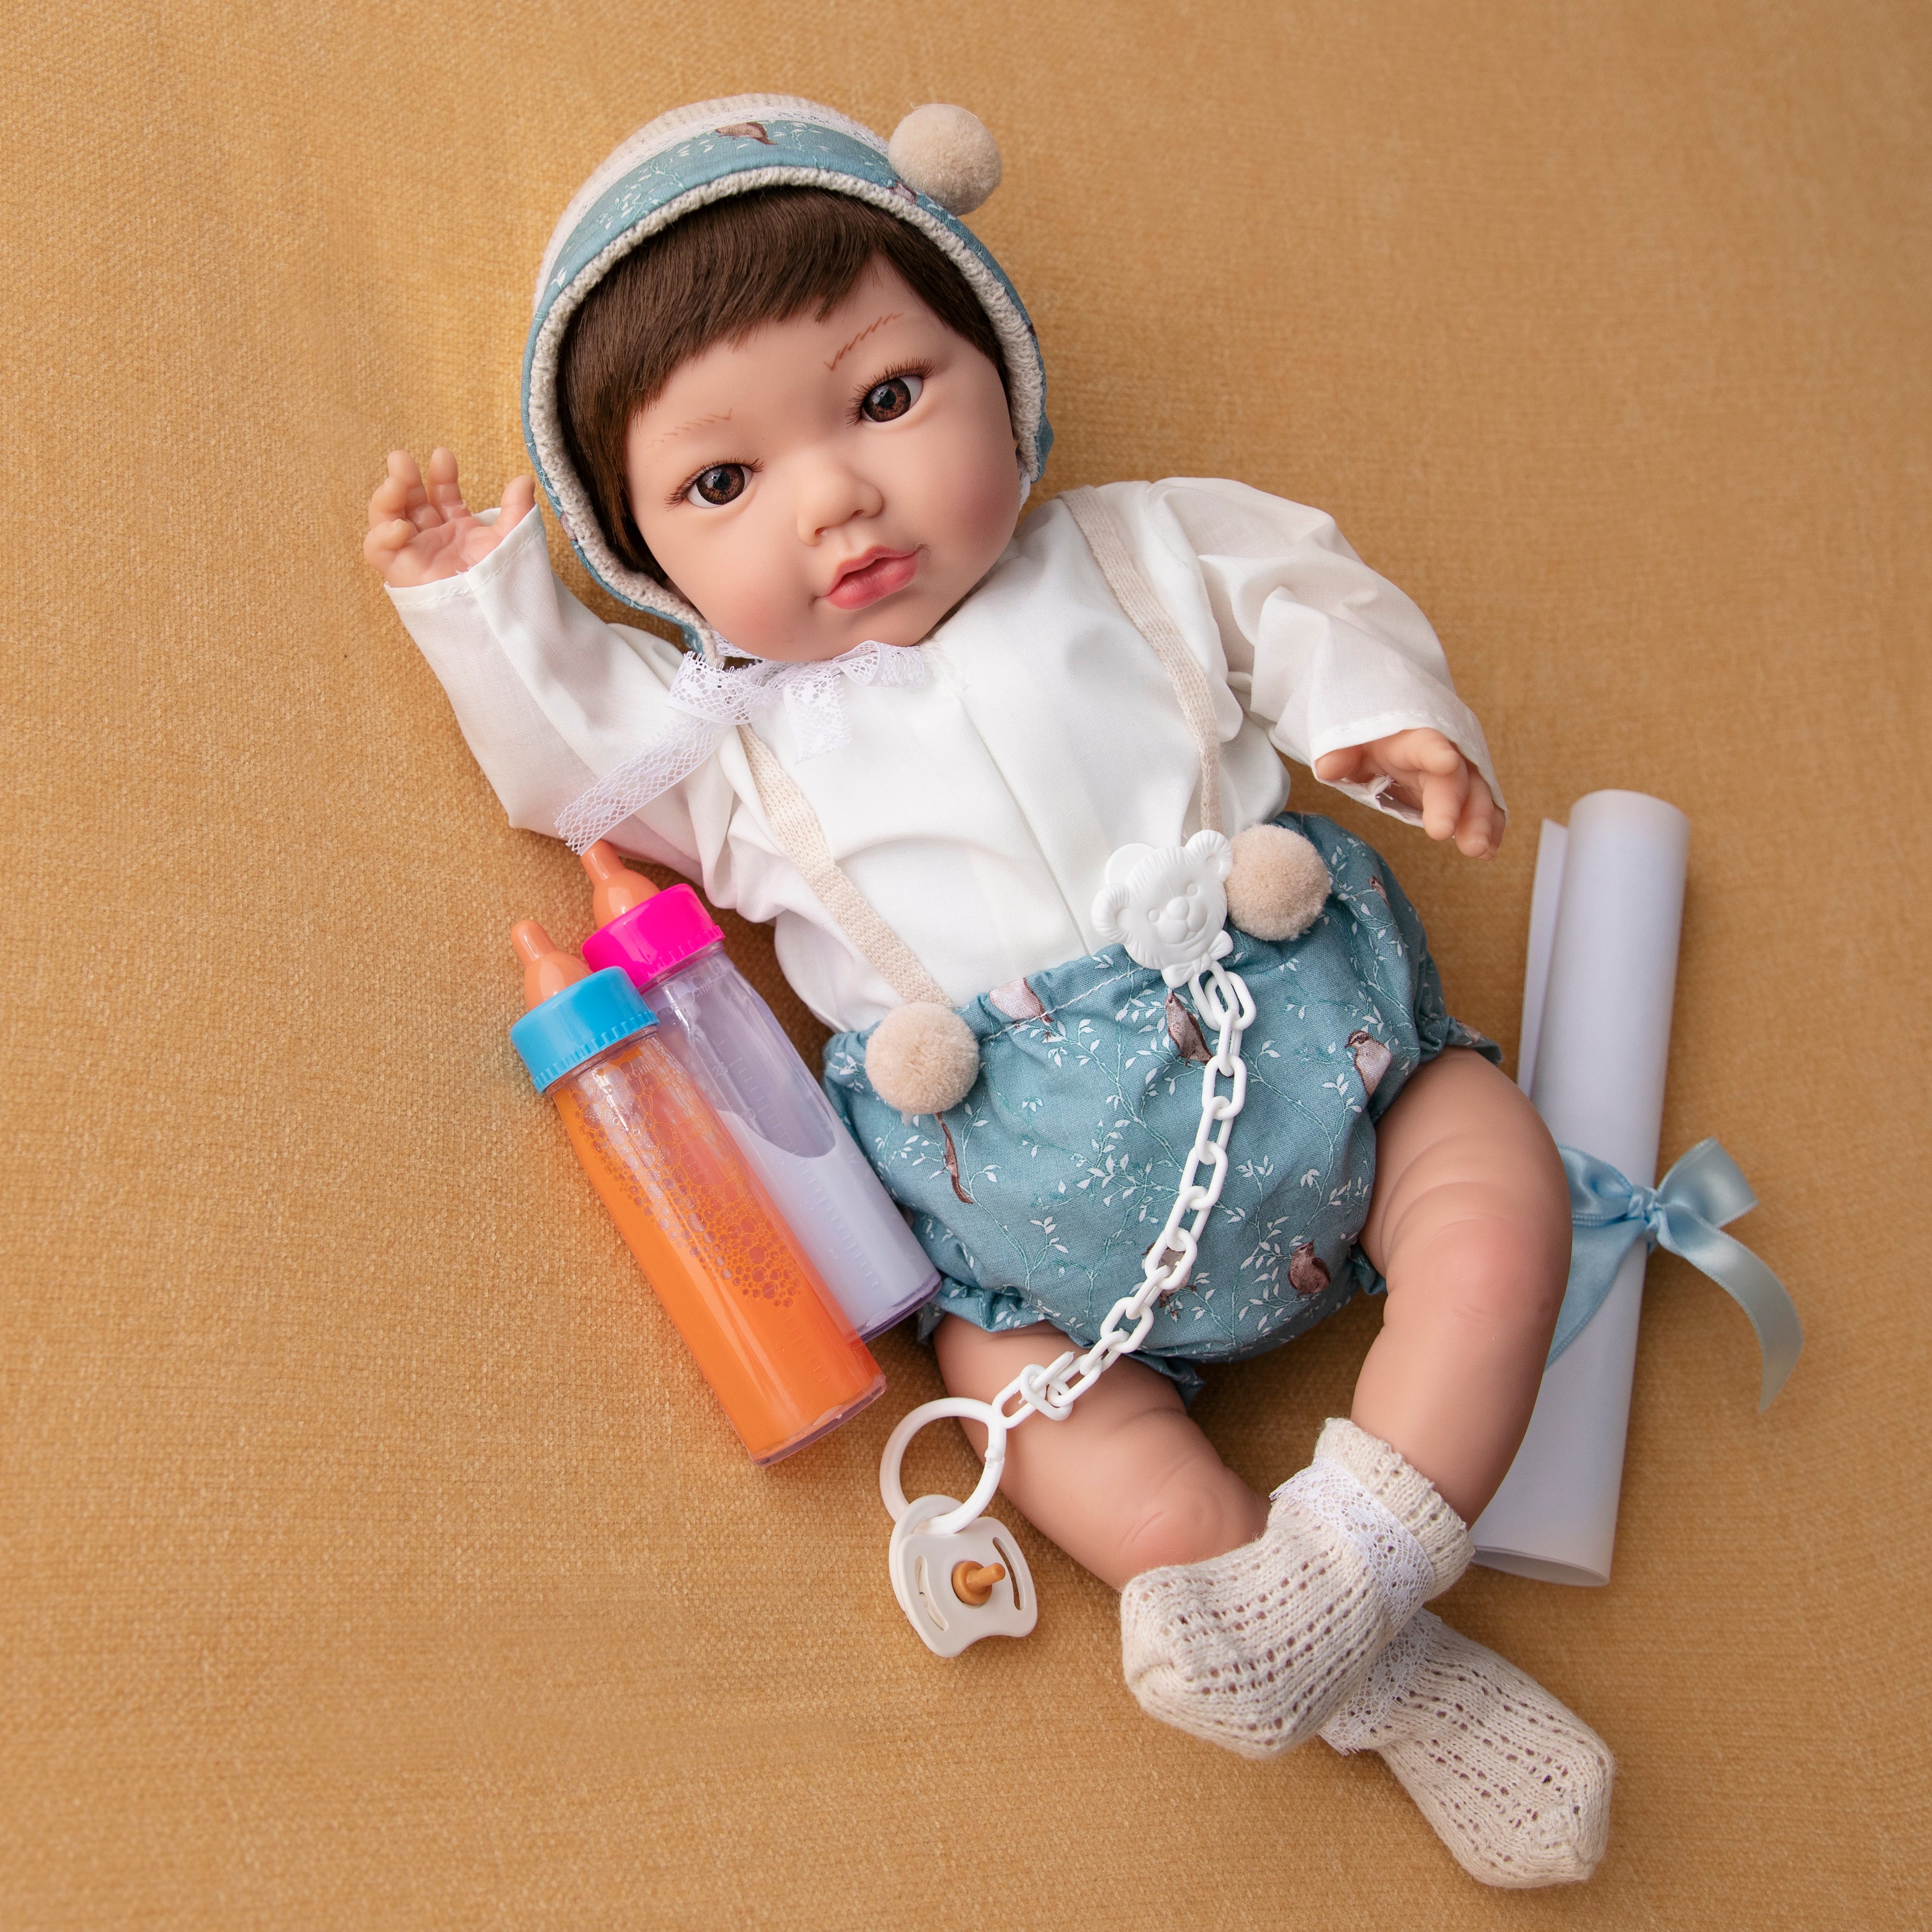 Reborn Baby Doll Reborn Paolo - 48CM and 2KG - SILICONE VINYL and HEAD DROPPING EFFECT